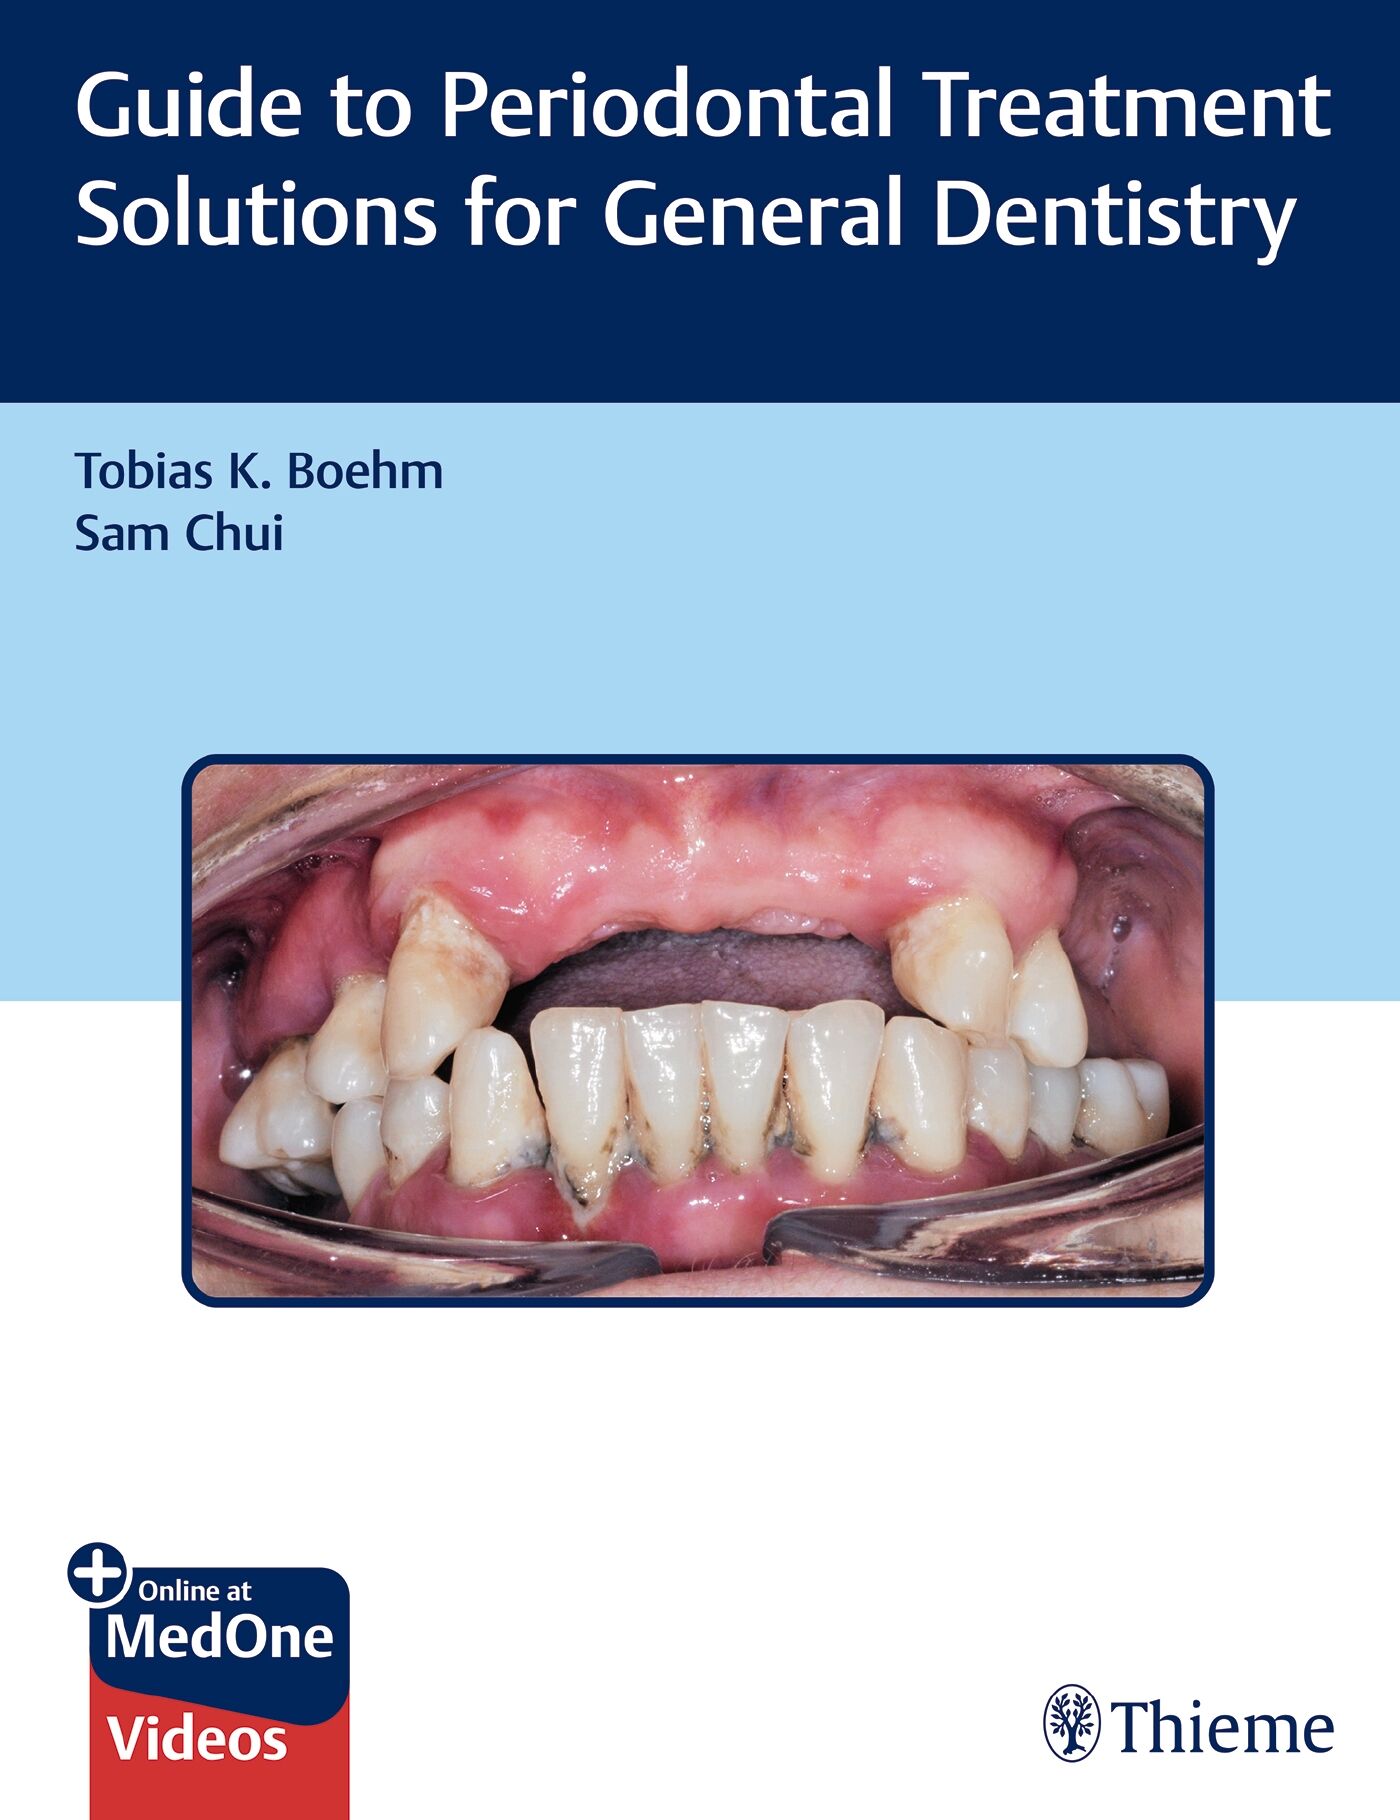 Guide to Periodontal Treatment Solutions for General Dentistry, 9781626238015